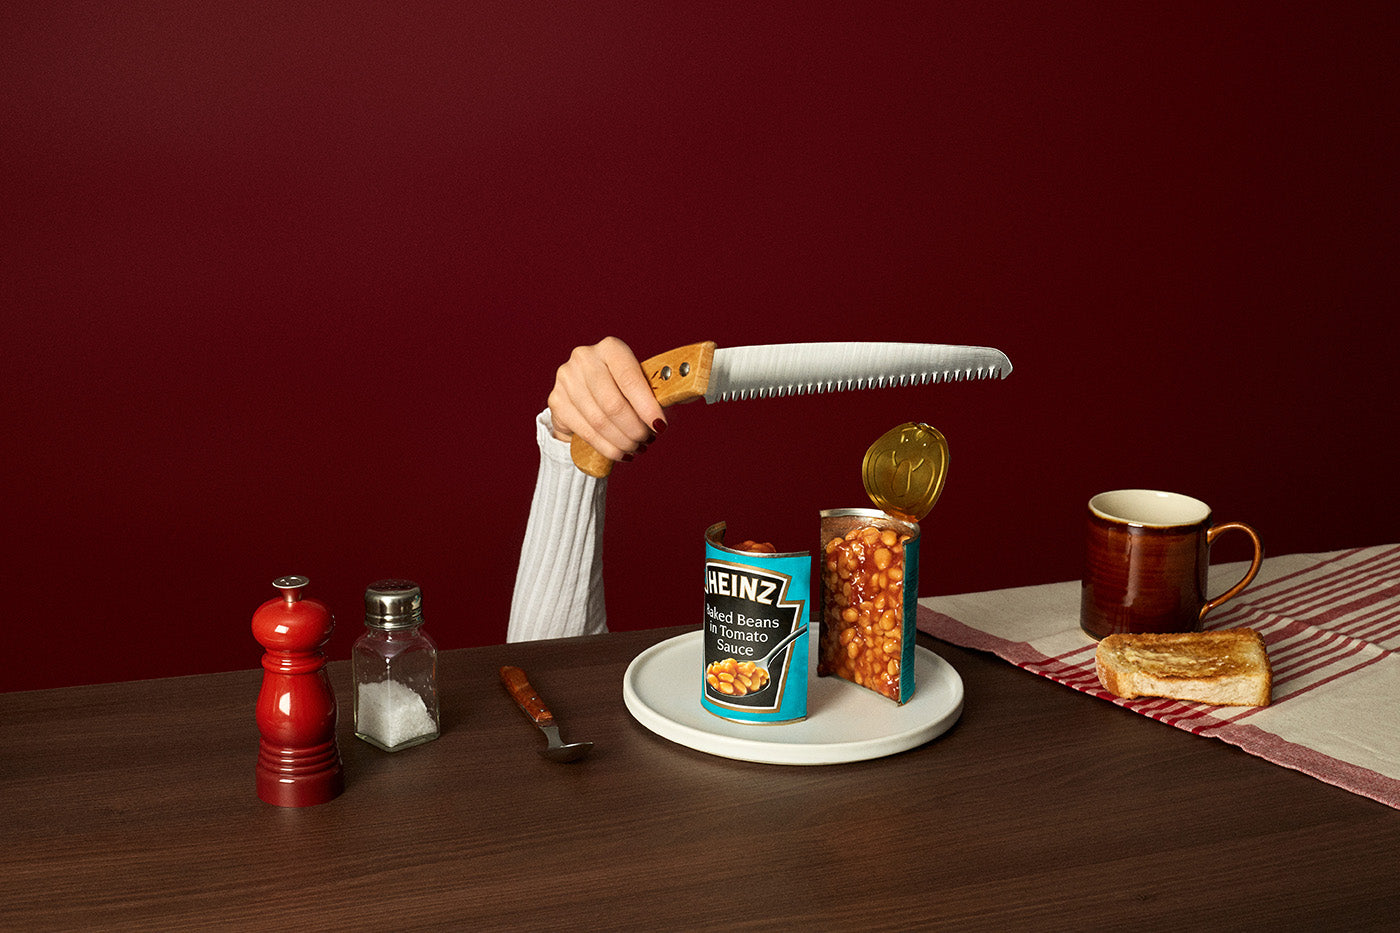 Sawing baked beans in half. Image by Fragmento Universo 